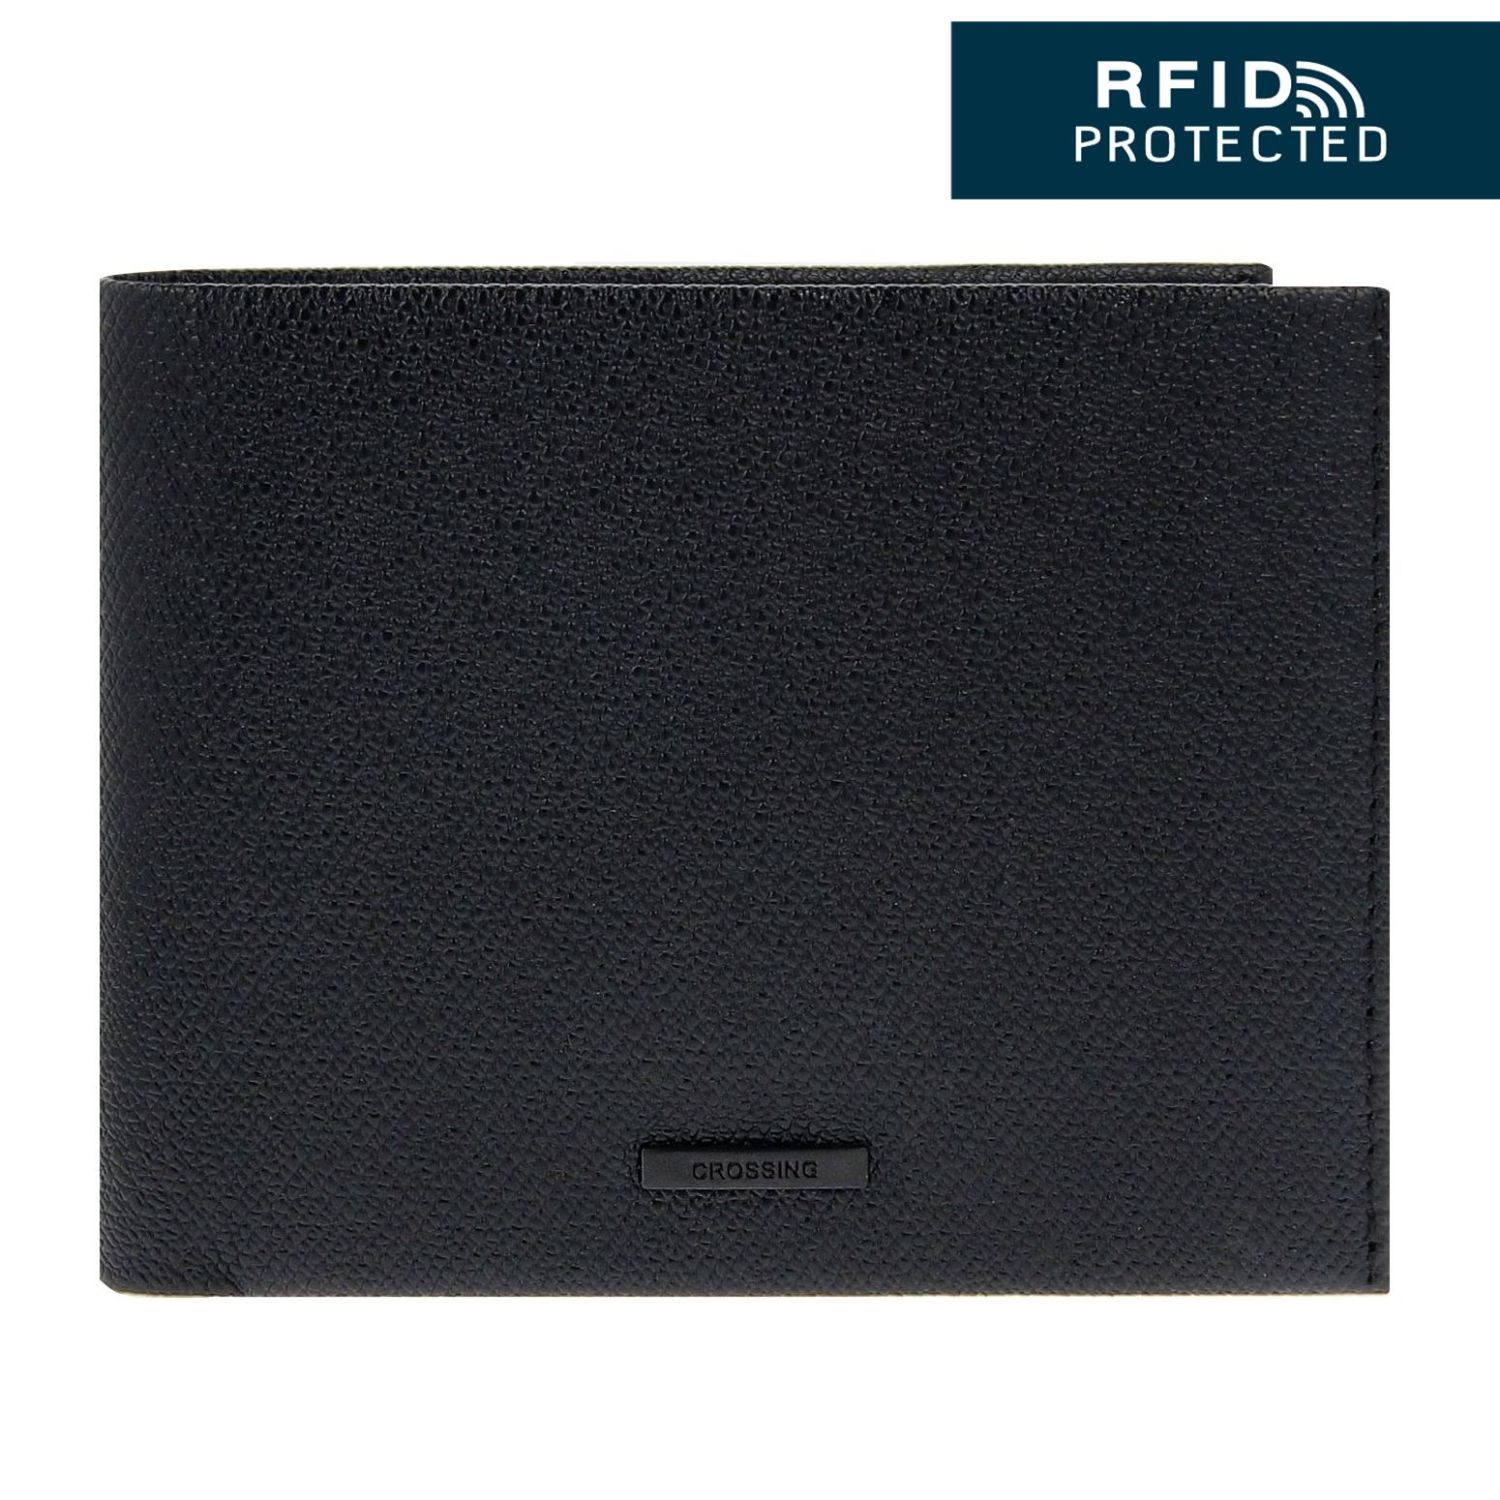 Crossing-Elite-Bi-fold-Leather-Wallet-With-Window-And-Coin-Pocket-RFID-Black-1-1.jpg